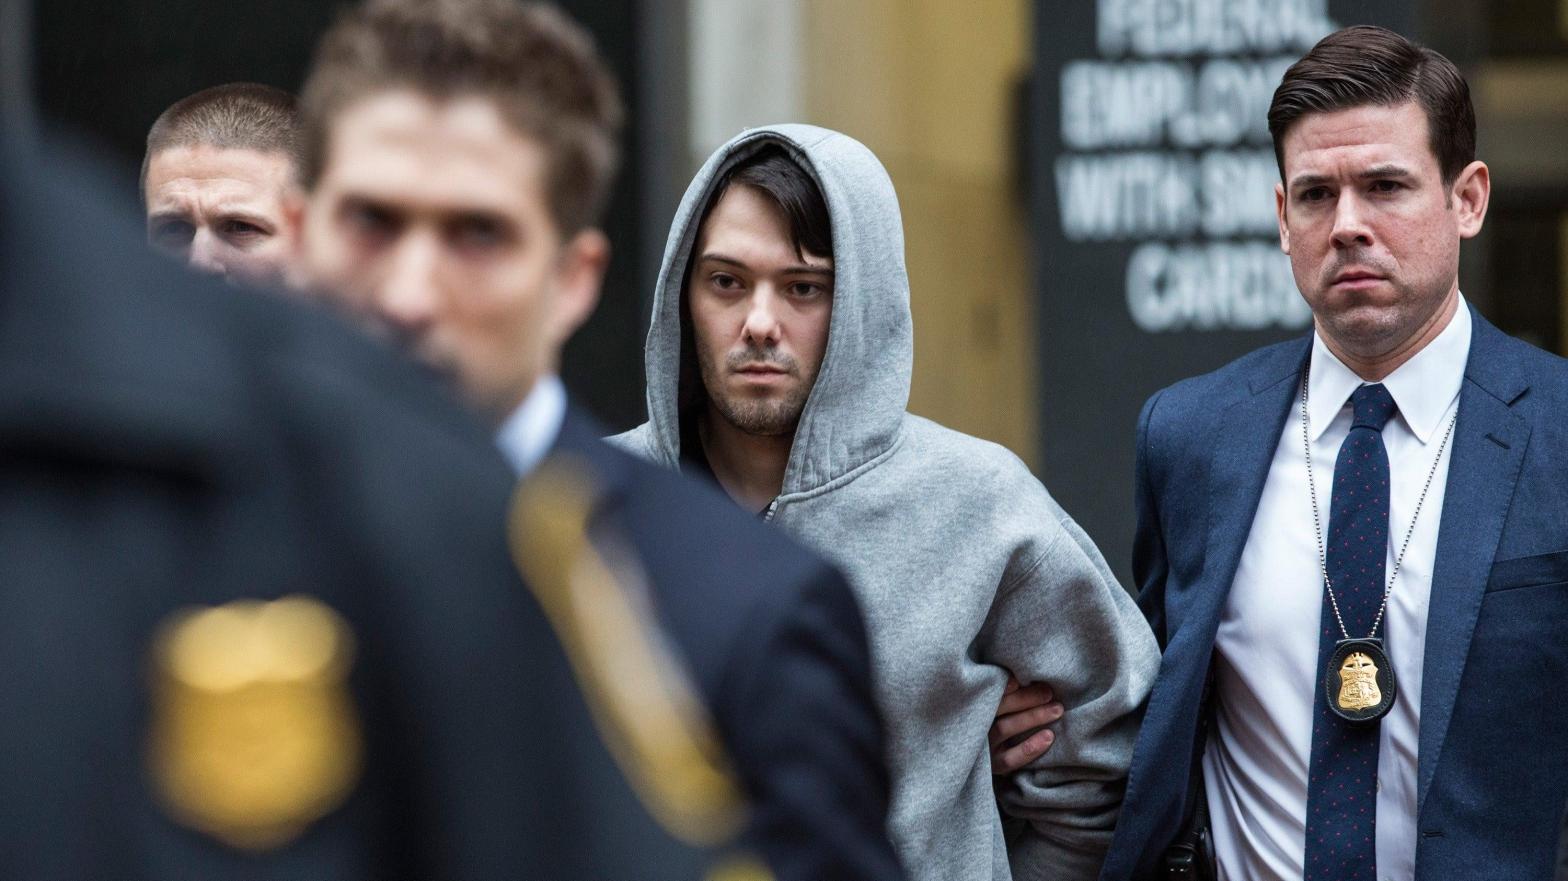 Martin Shkreli was arrested in New York City in 2015 for securities fraud. (Image: Andrew Burton, Getty Images)